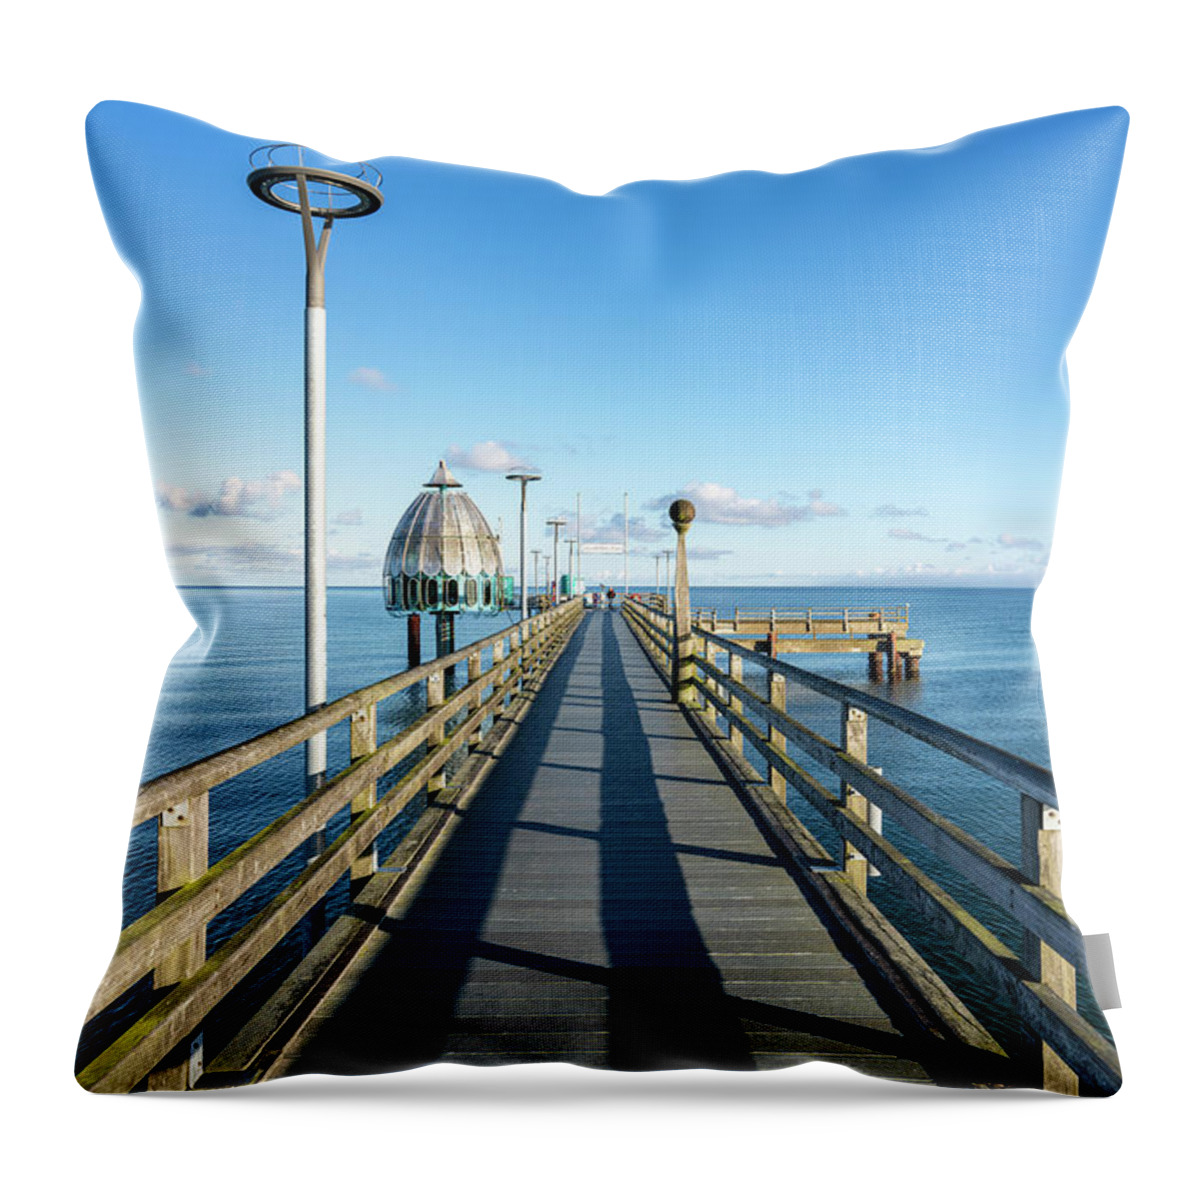 Ip_71342220 Throw Pillow featuring the photograph Morning Mood On The Baltic Sea Beach Of The Baltic Sea Spa Zingst, Fischland-darss-zingst, Mecklenburg-western Pomerania, Germany. #3 by Franz Subauer